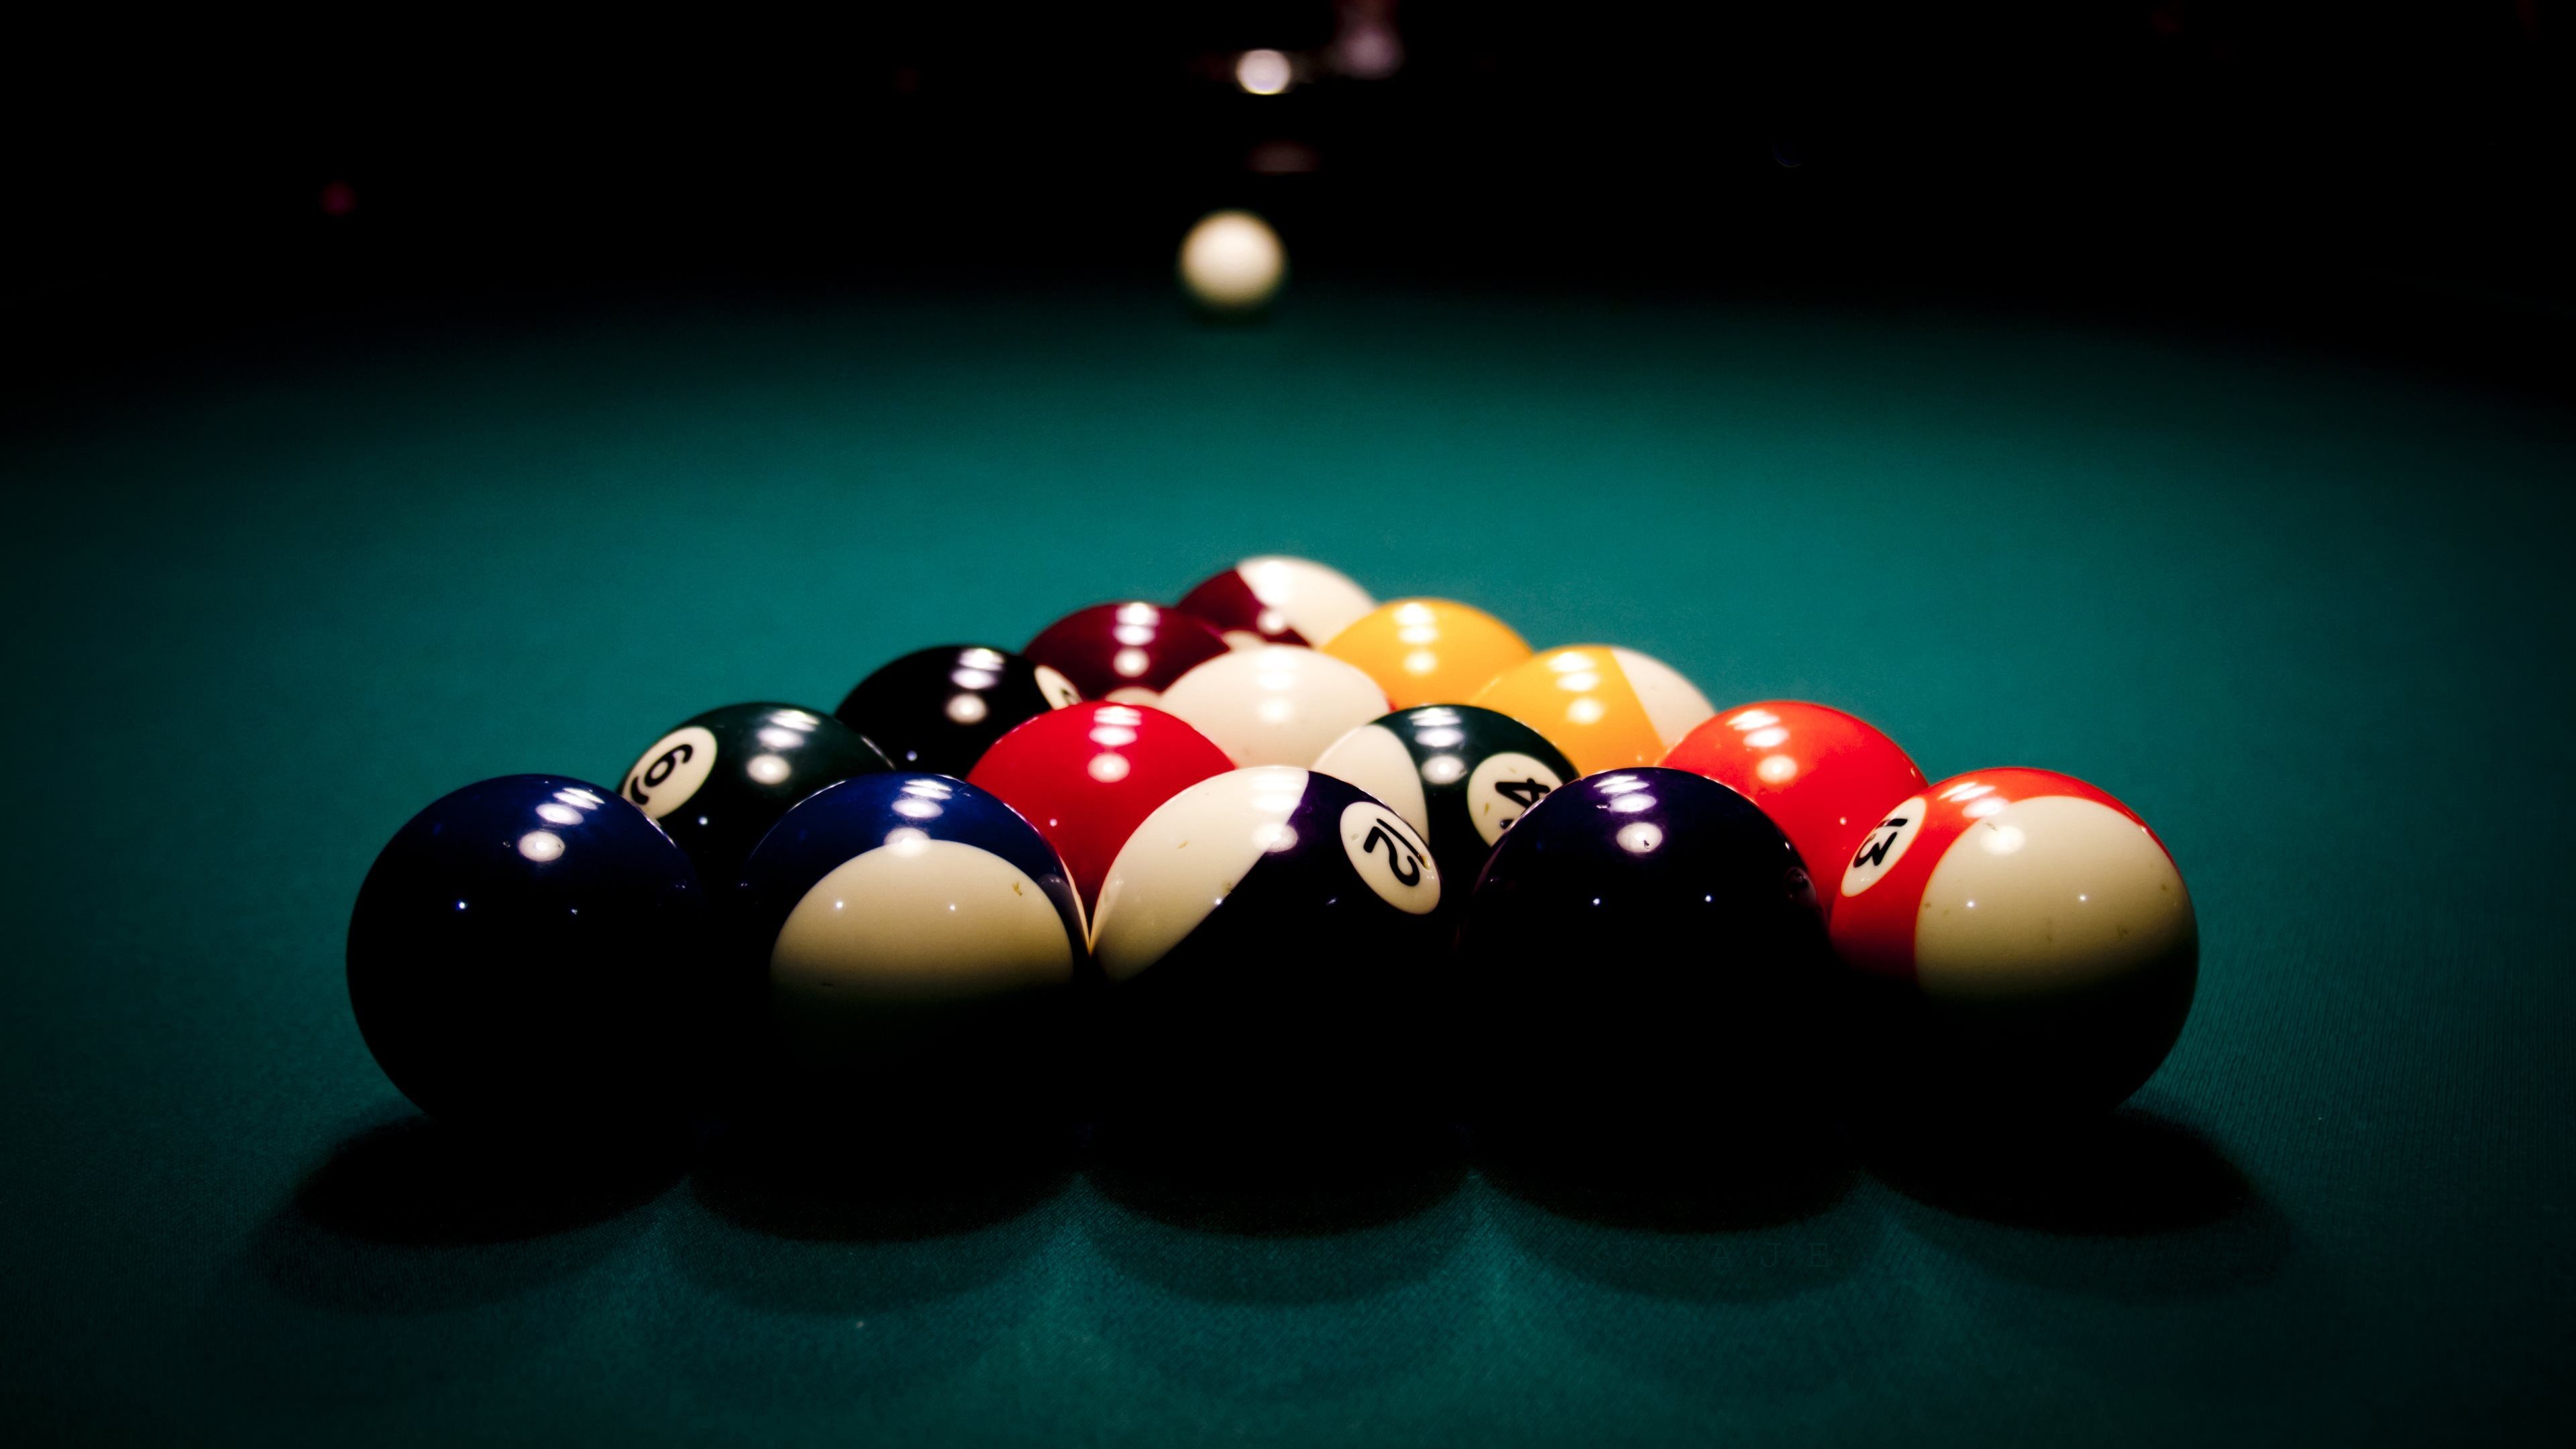 Billiards: Classic eight-ball, Seven solid-colored balls, seven striped balls, and the black 8 ball. 3840x2160 4K Background.